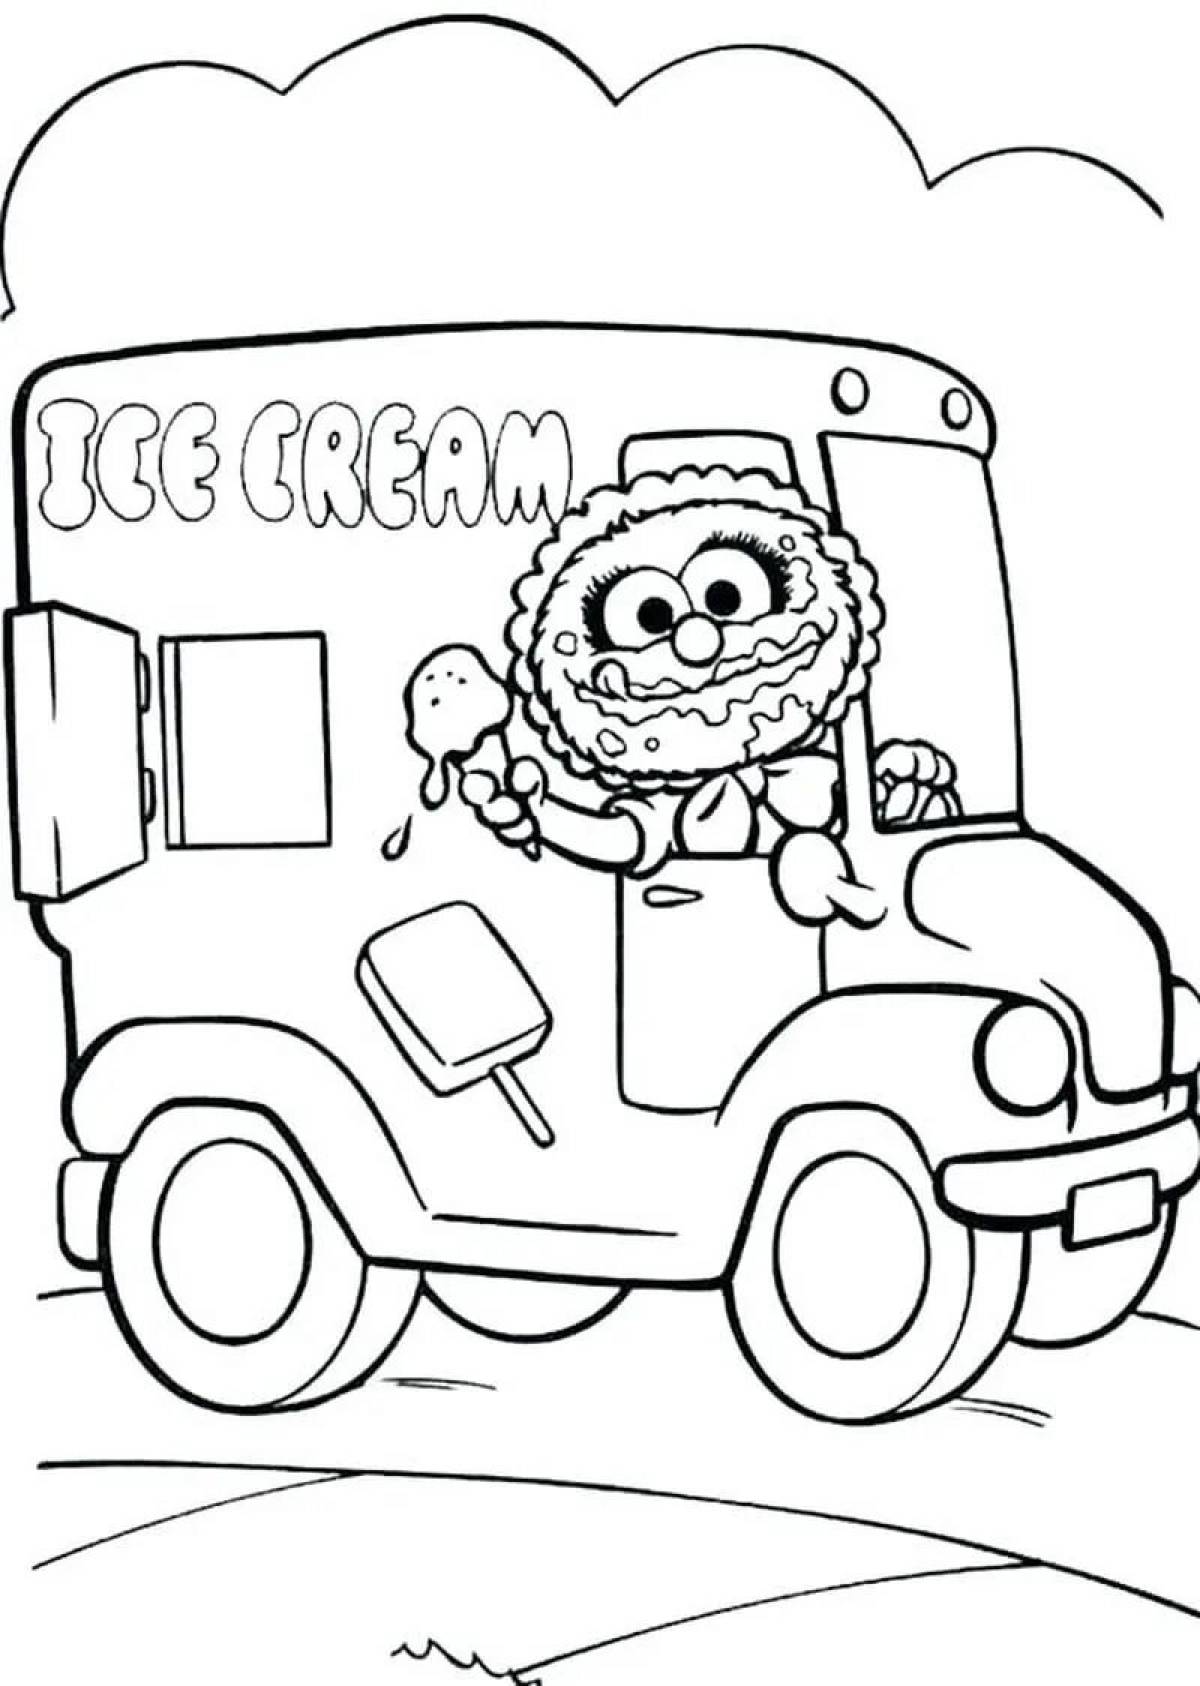 Ice cream mask color-explosion coloring page